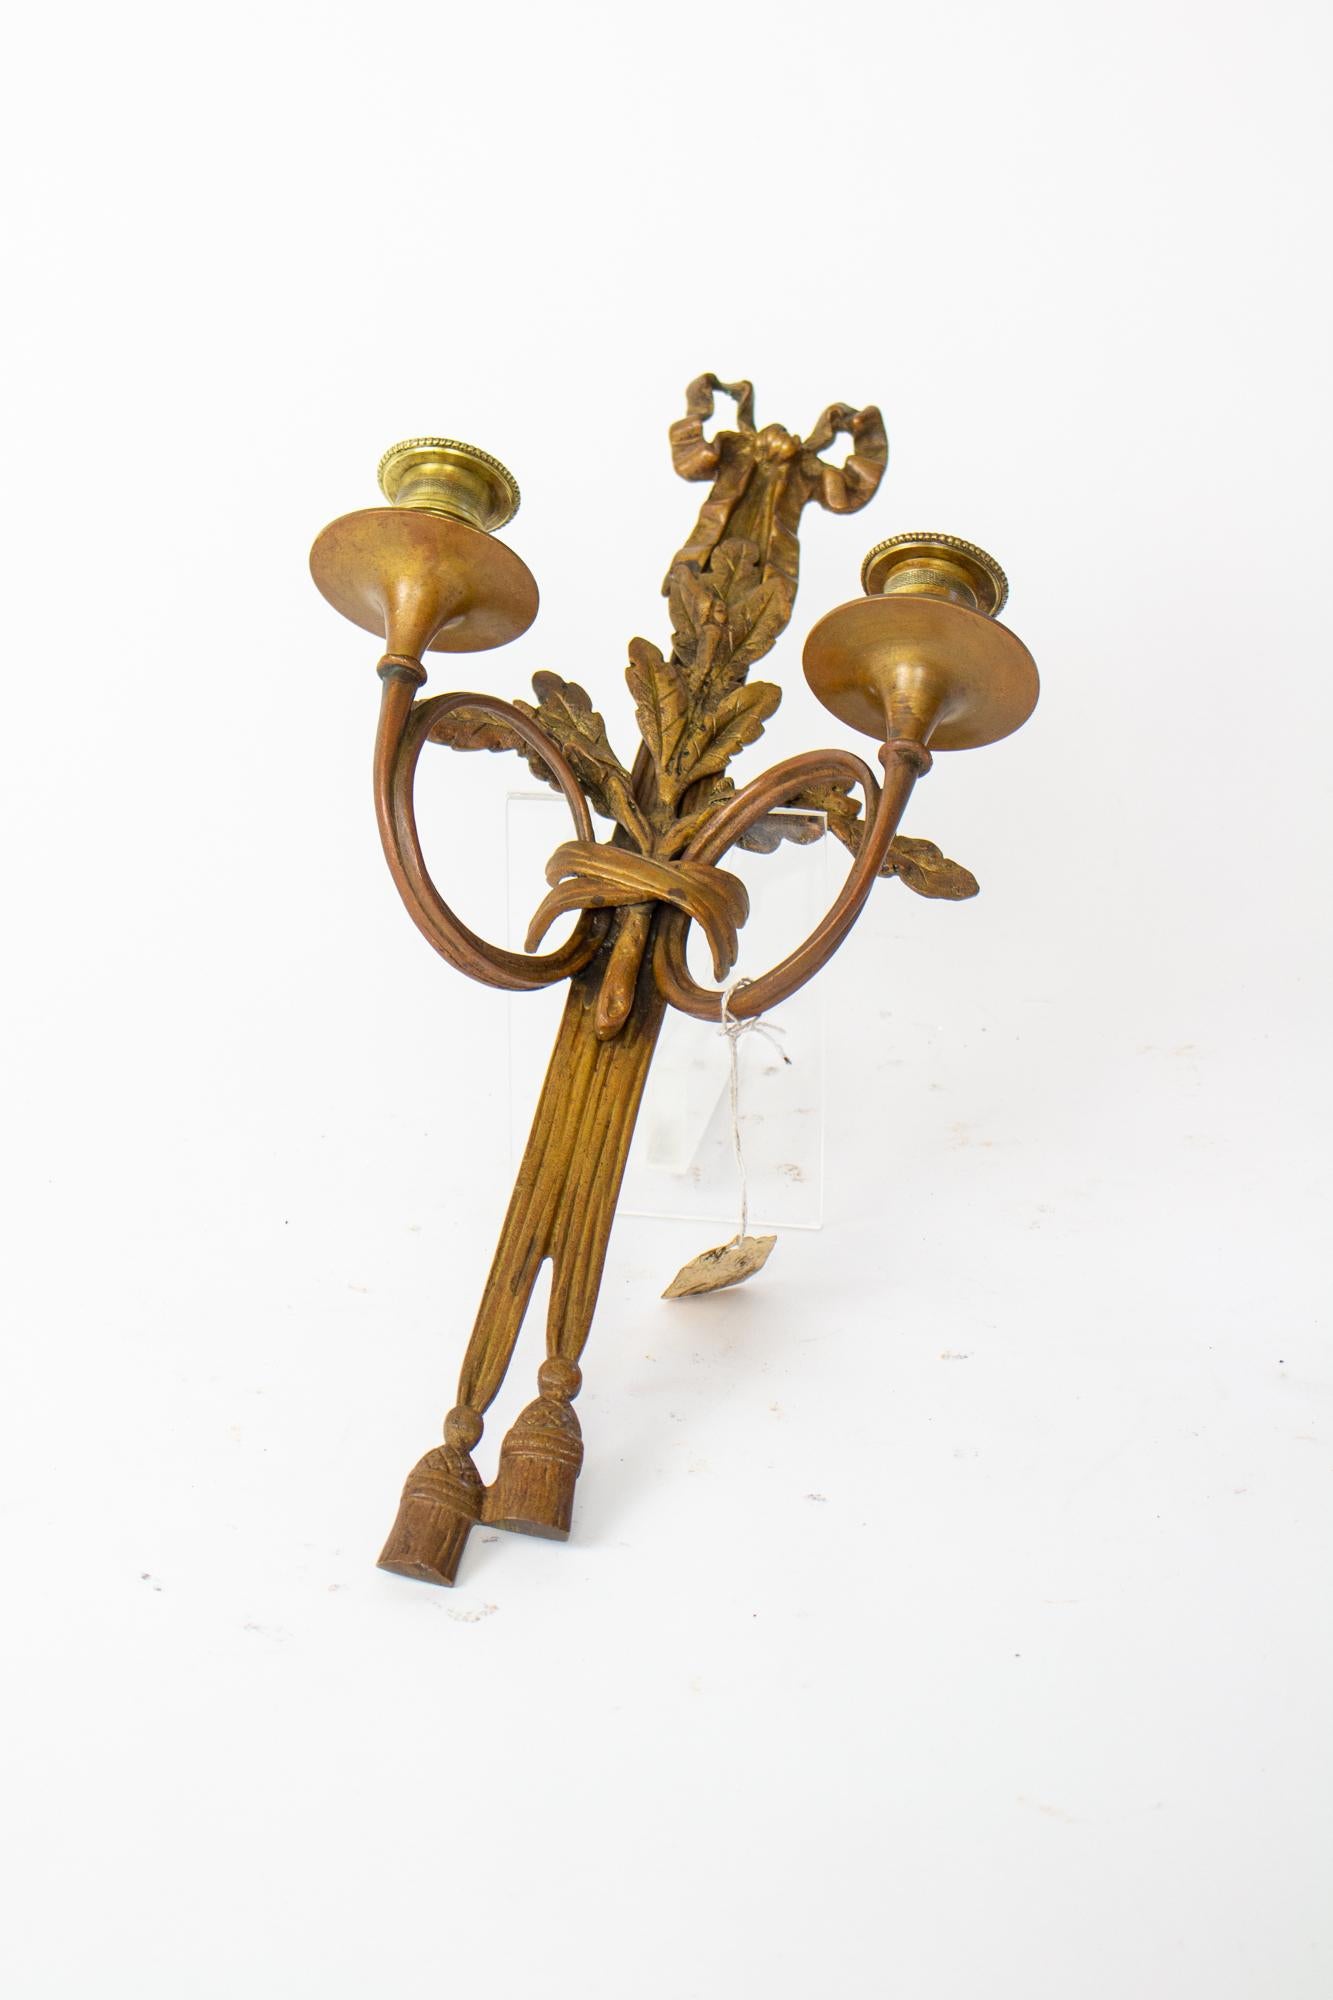 19th Century bronze candle sconce. beautiful casting of a ribbon and sheath of wheat. Two candle ups on slender arms. not electrified. 

Dimensions: 
Width: 8